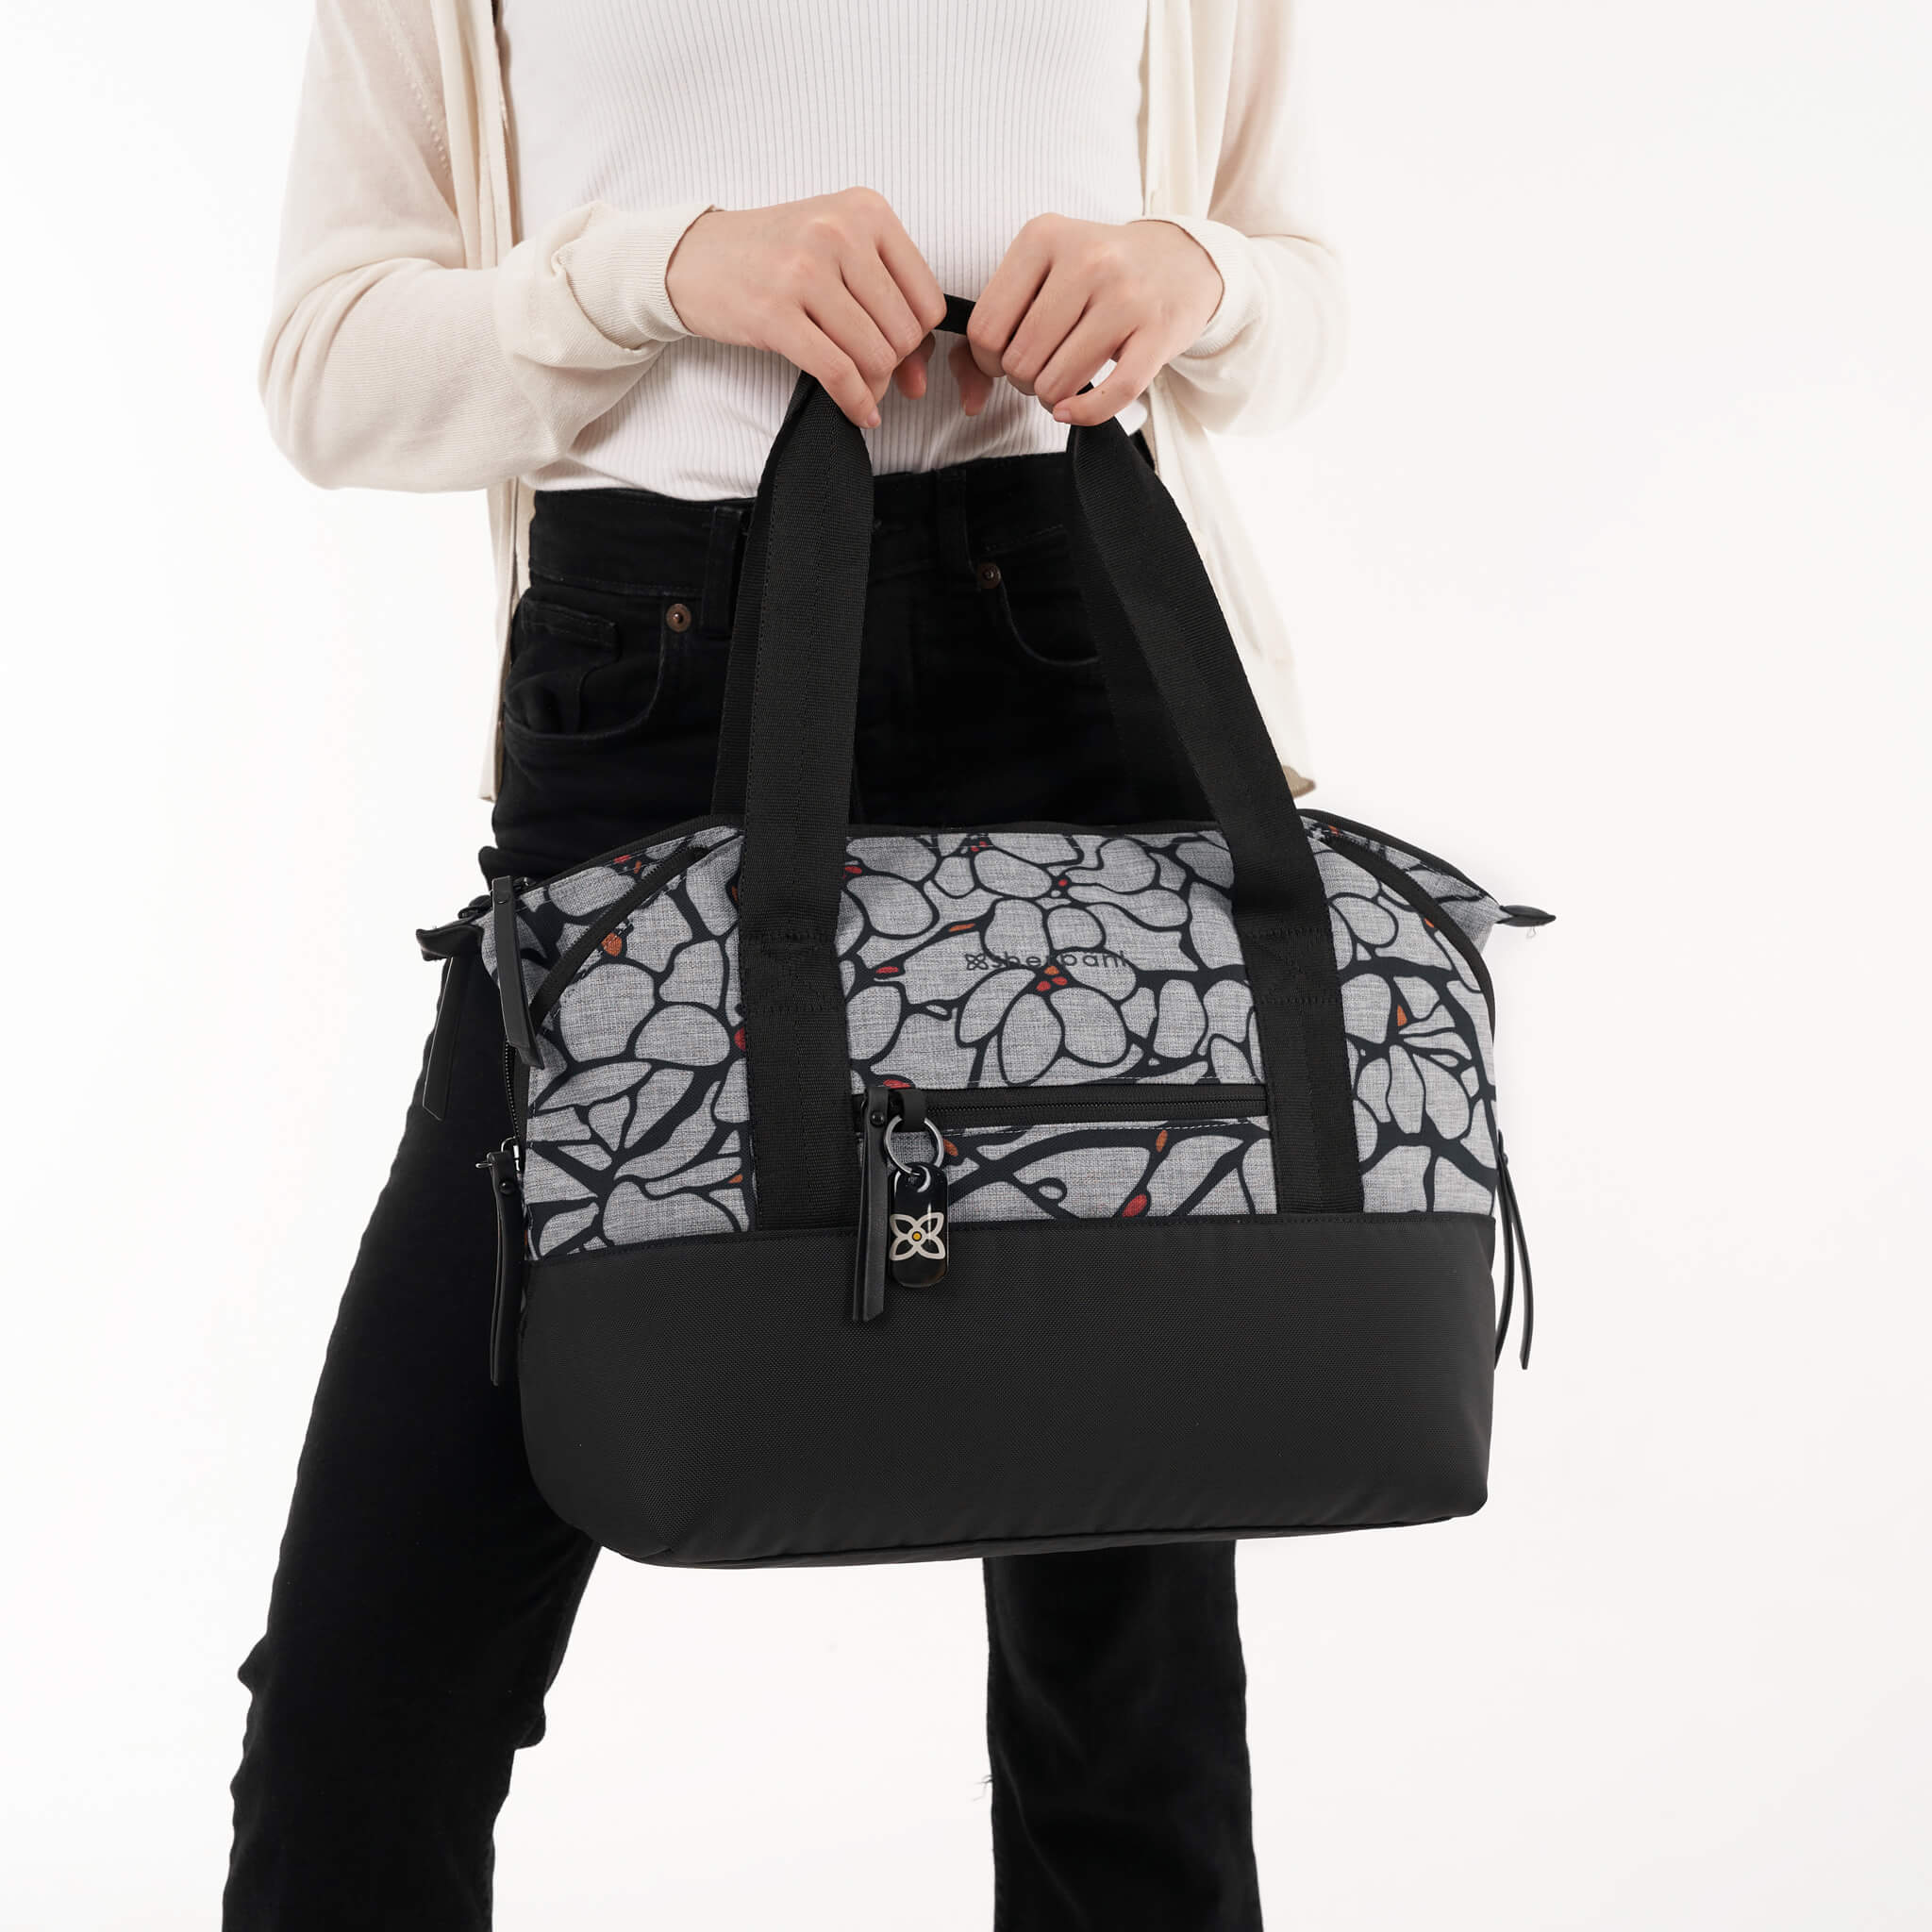 A model holding Sherpani travel tote, the Eclipse in Sakura, by the tote bag handles. 